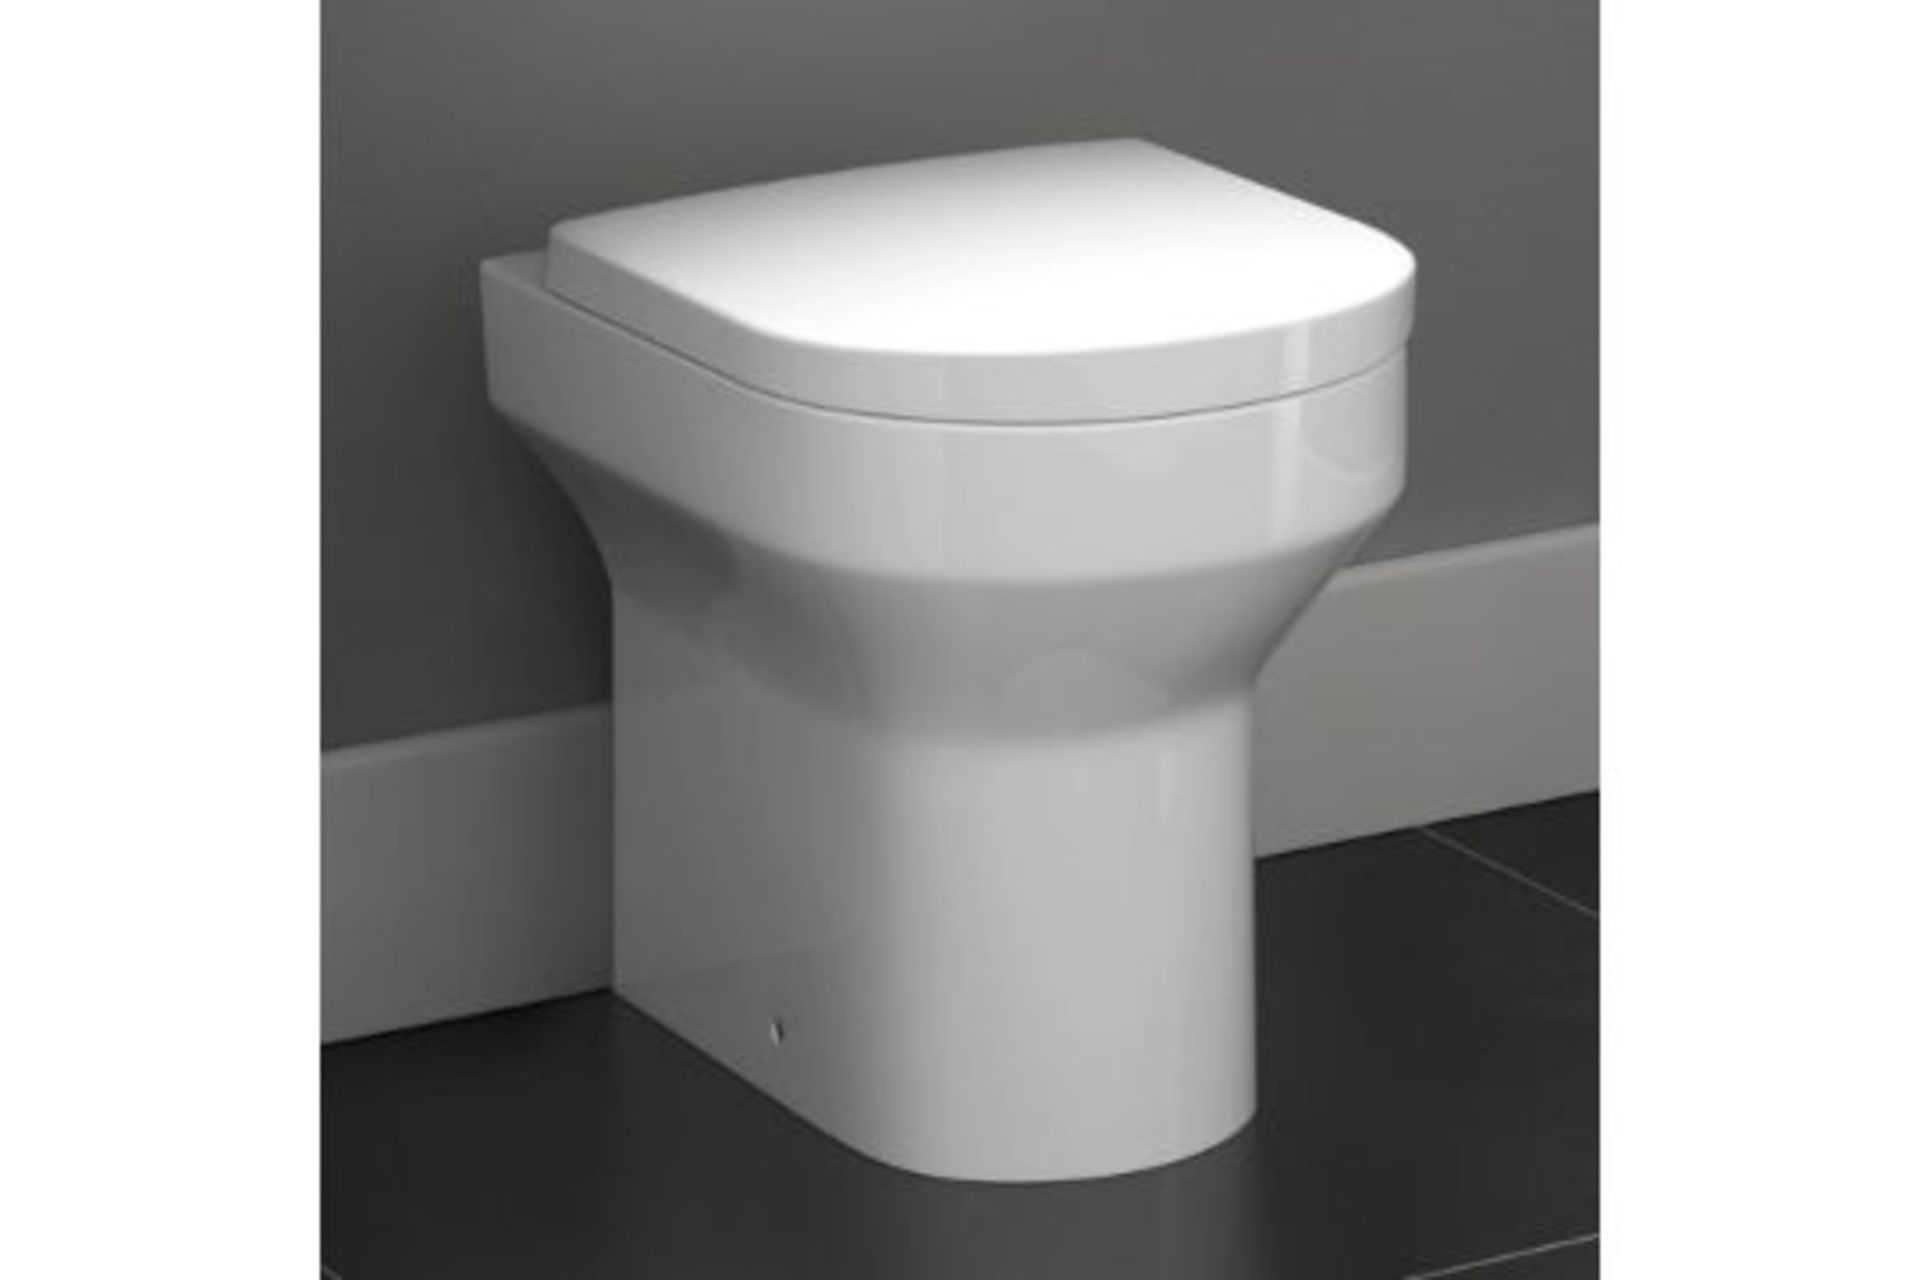 New & Boxed Cesar Back To Wall Toilet Inc Soft Close Seat. 621Bwp Made From White Vitreous Chi...